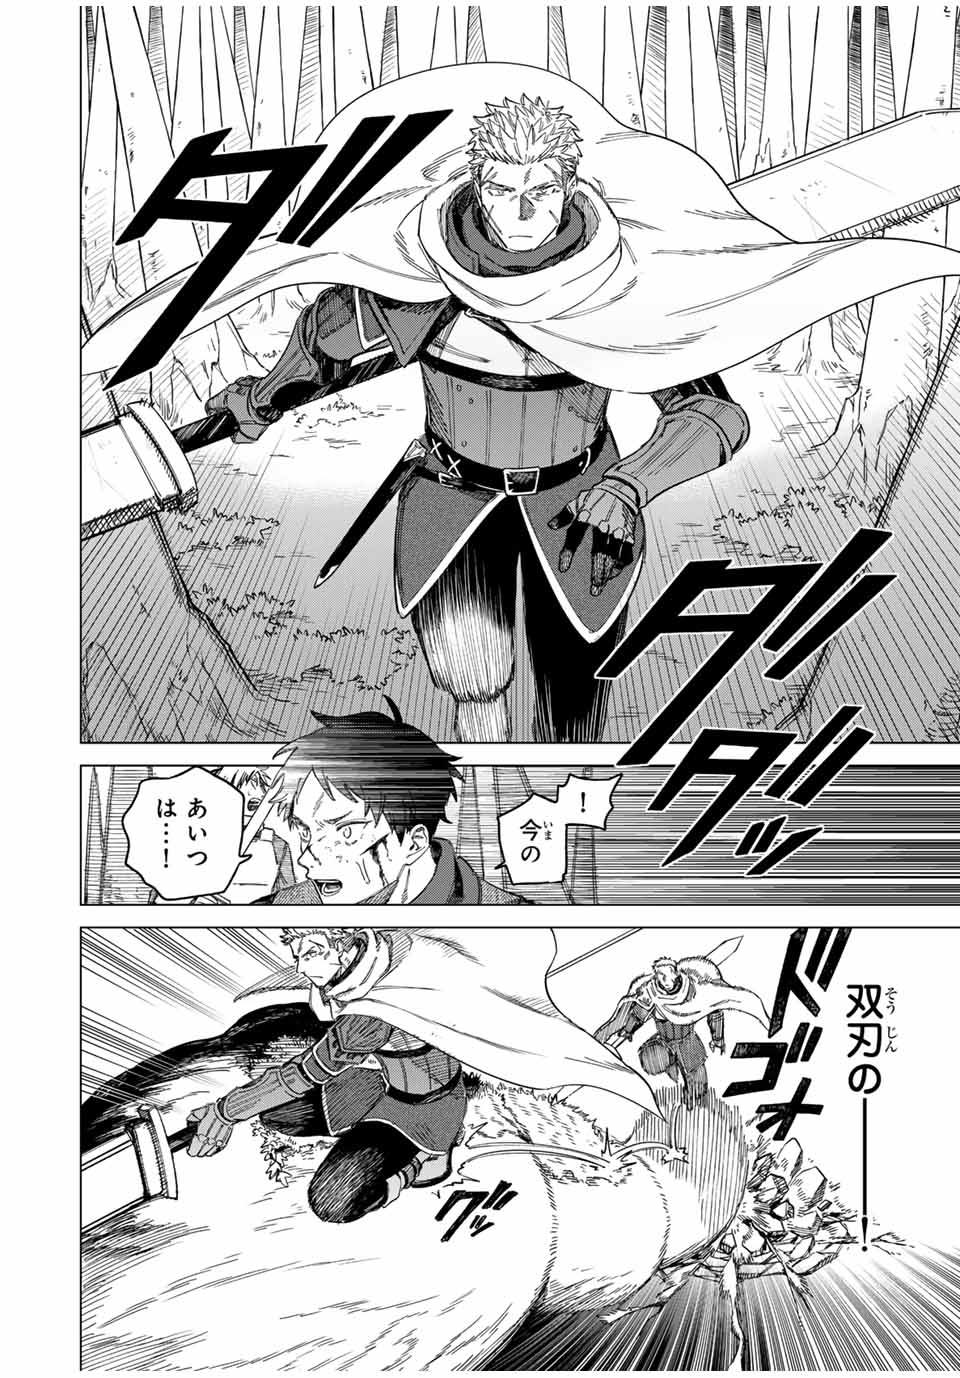 Witch and Mercenary 魔女と傭兵 第1.2話 - Page 2